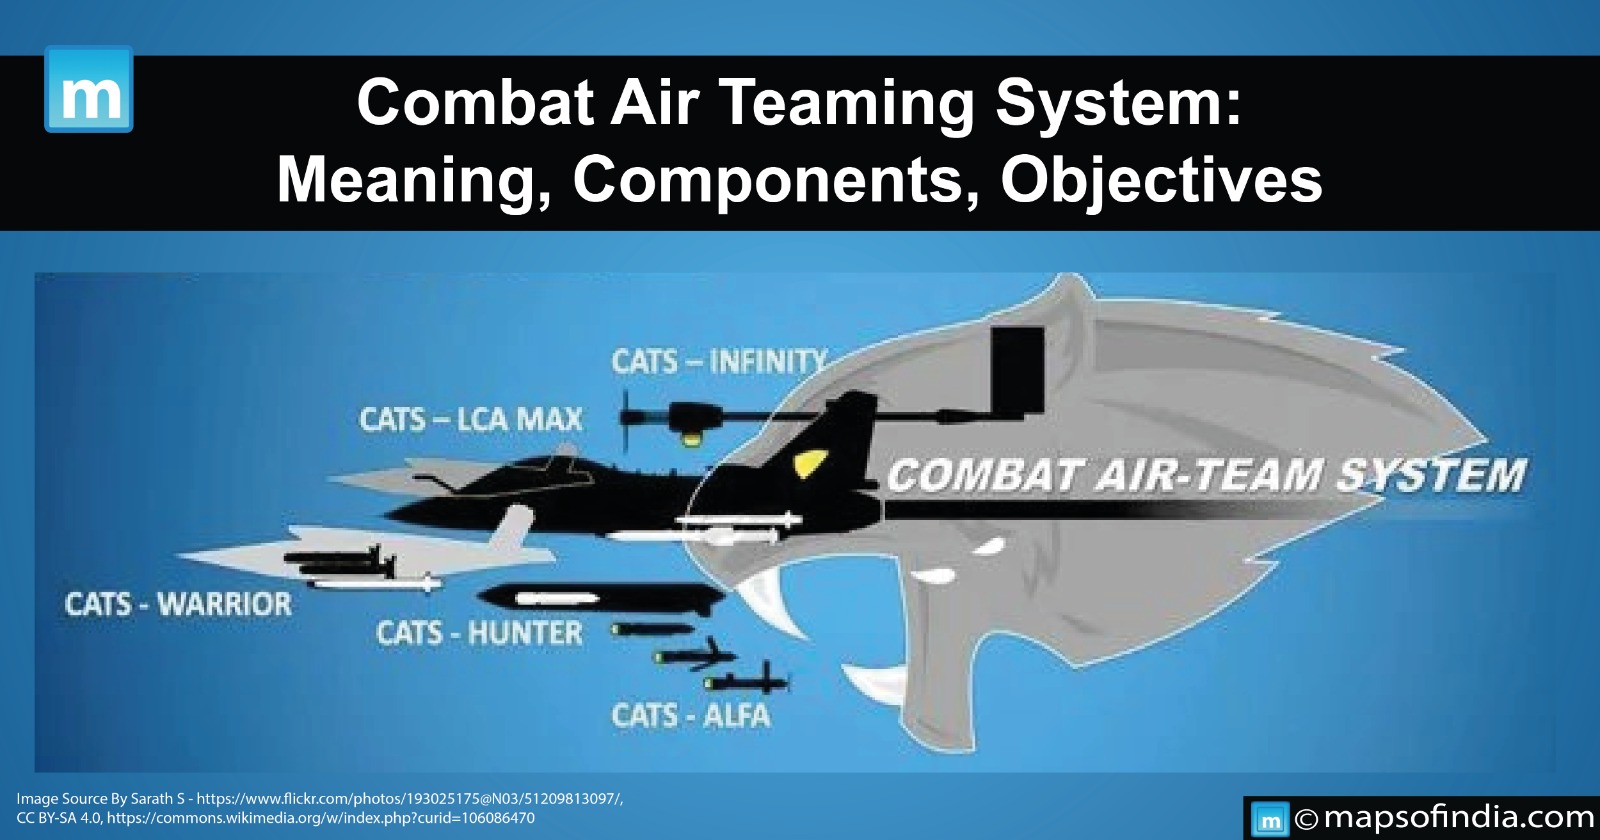 Combat Air Teaming System (CATS): Meaning, Components And